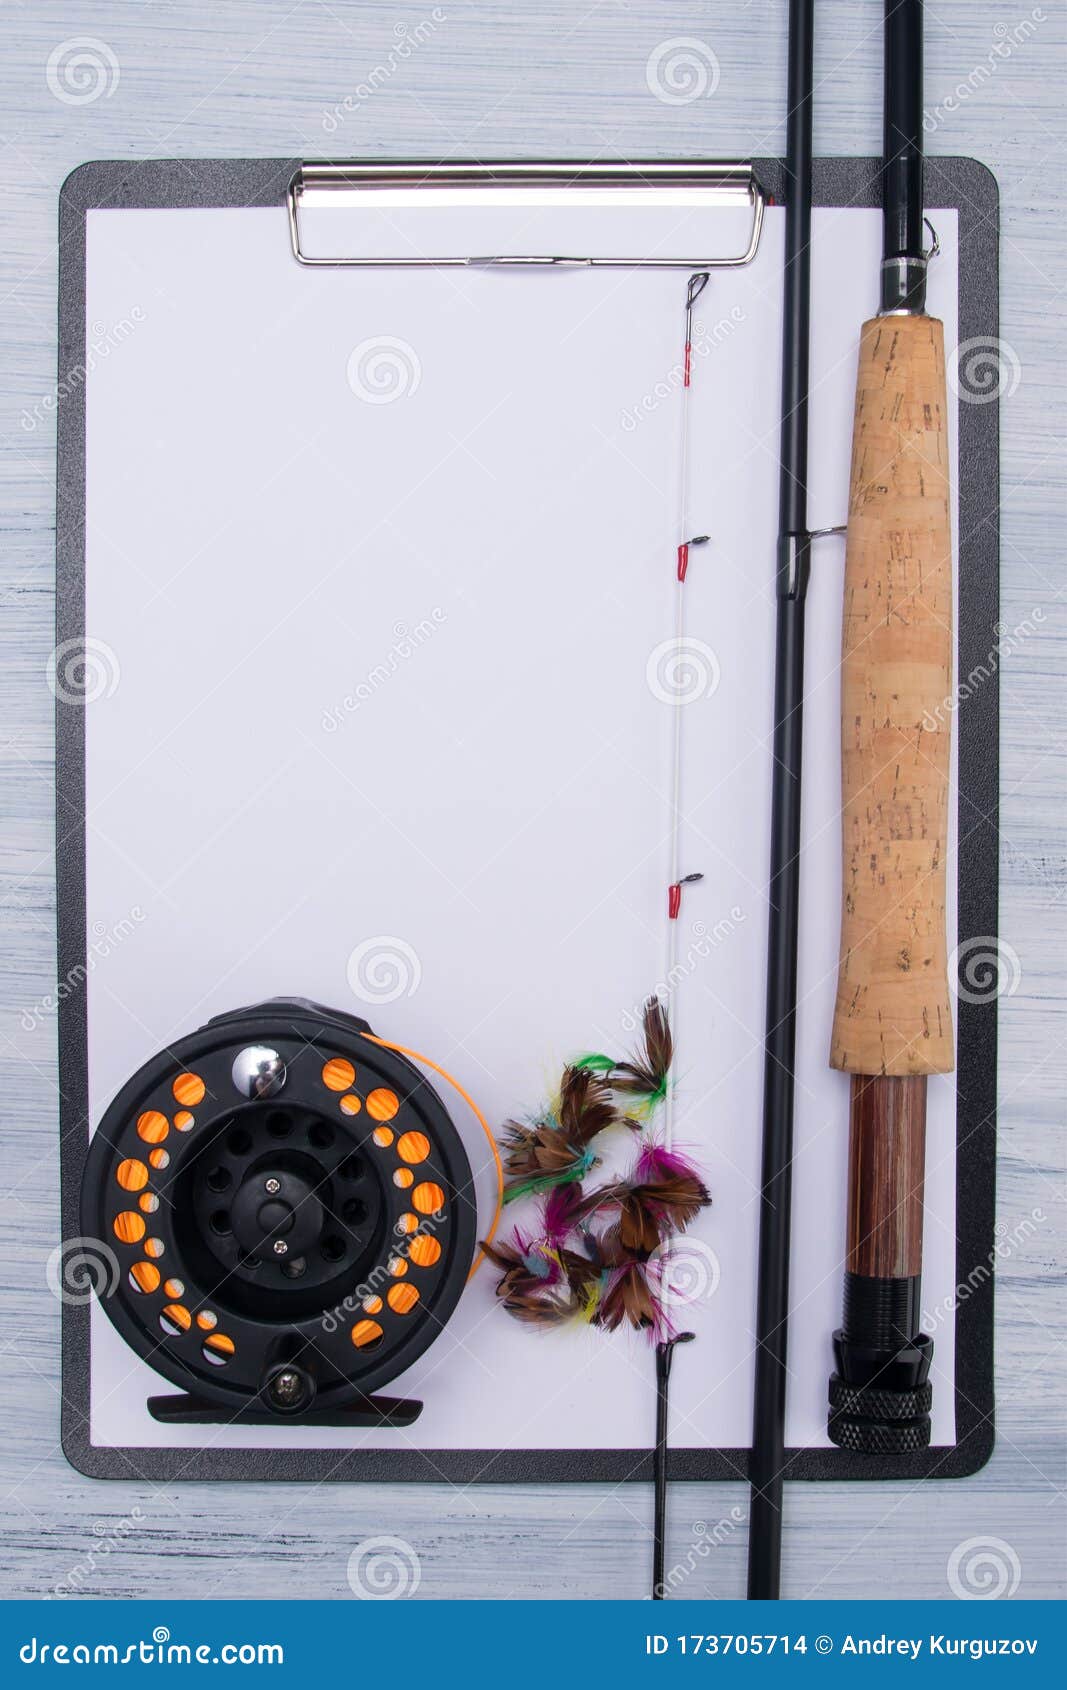 Wooden Handle from a Fishing Rod, Reel with Fishing Line and Bait with a  Hook, for Fishing, on a Sheet of Paper, on a Light Stock Photo - Image of  note, active